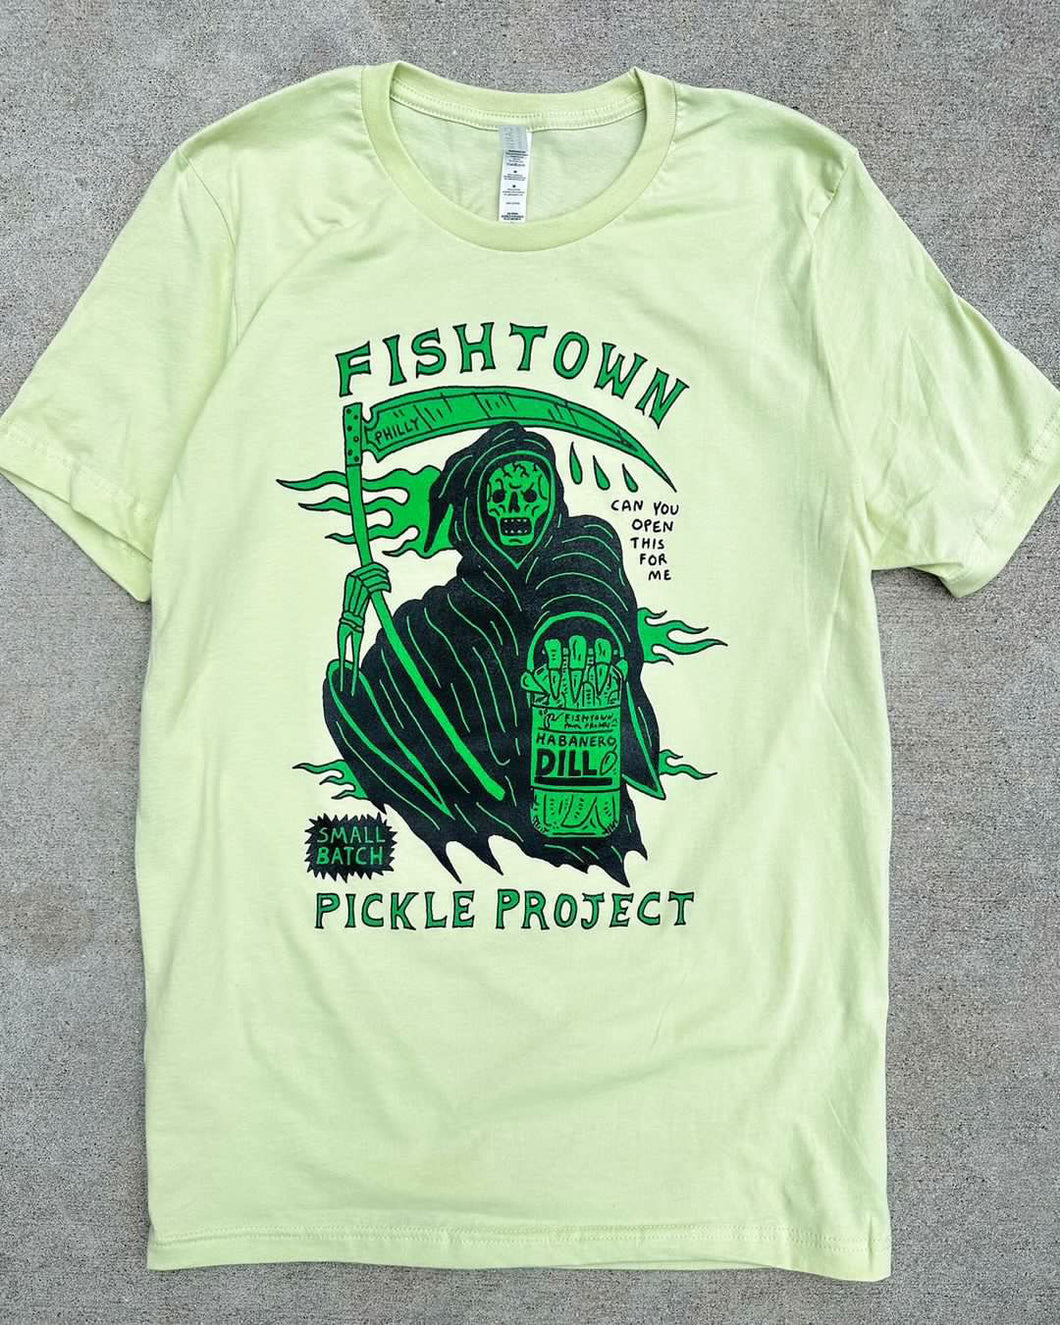 Custom art ode to our Habanero Dill pickles by beloved artist Eric Kenney of HEAVYSLIME. Green & black ink on lime green tee.